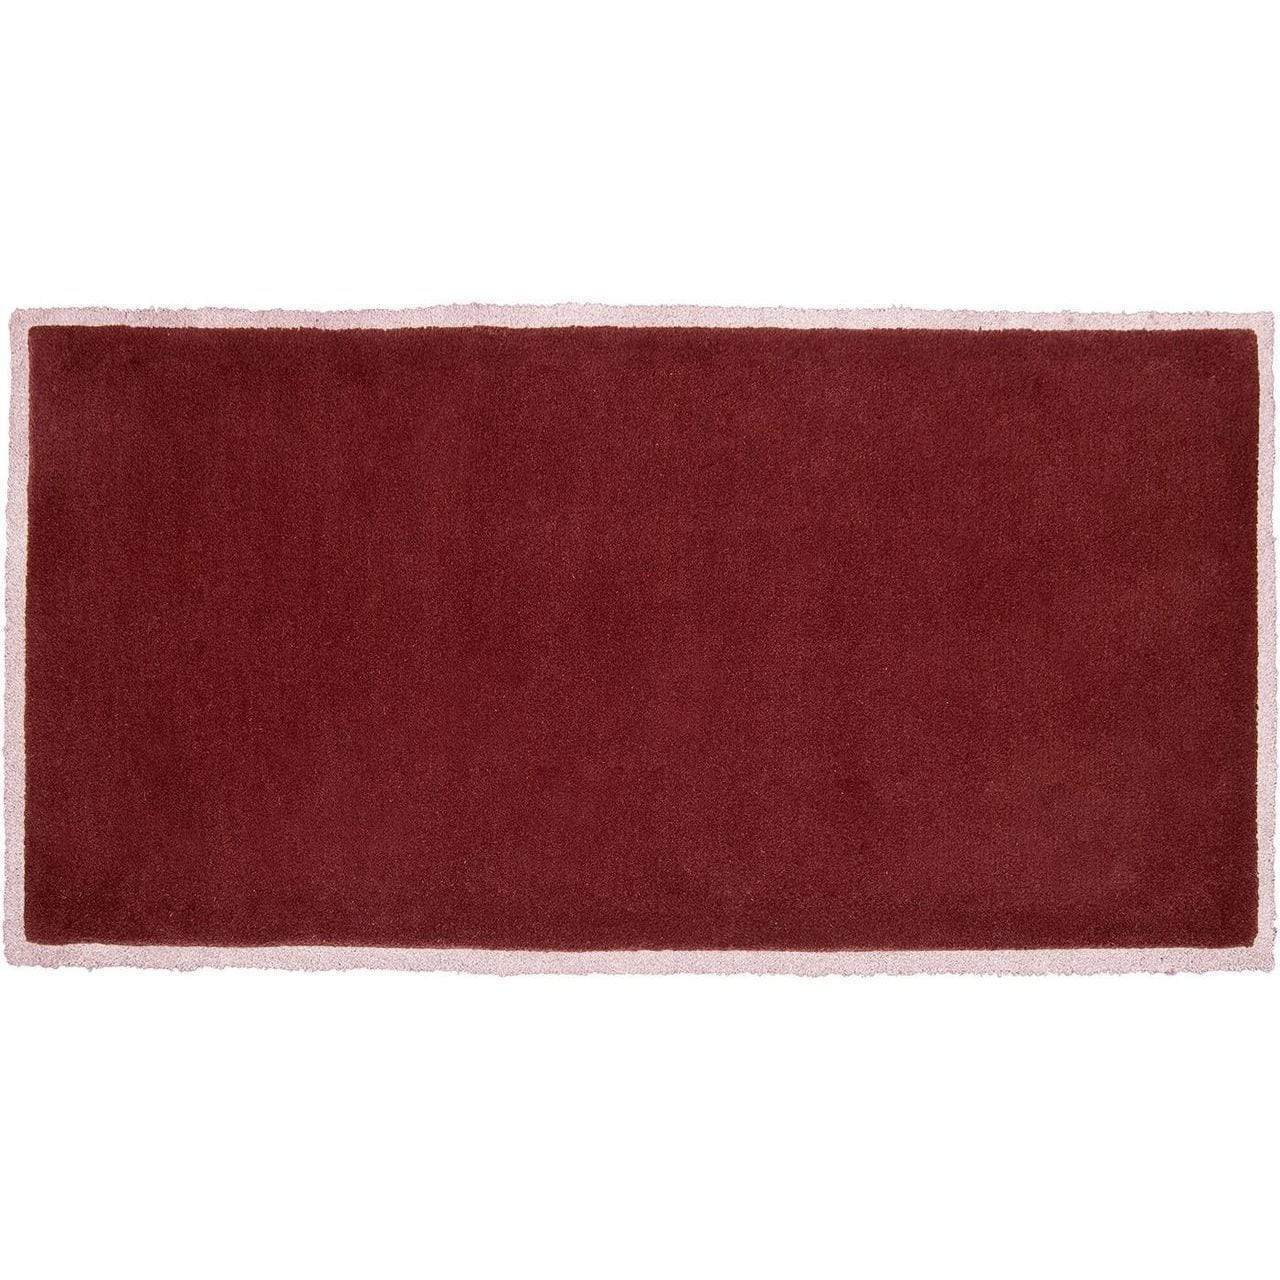 Minuteman Solid Color Rectangular Hearth Rugs